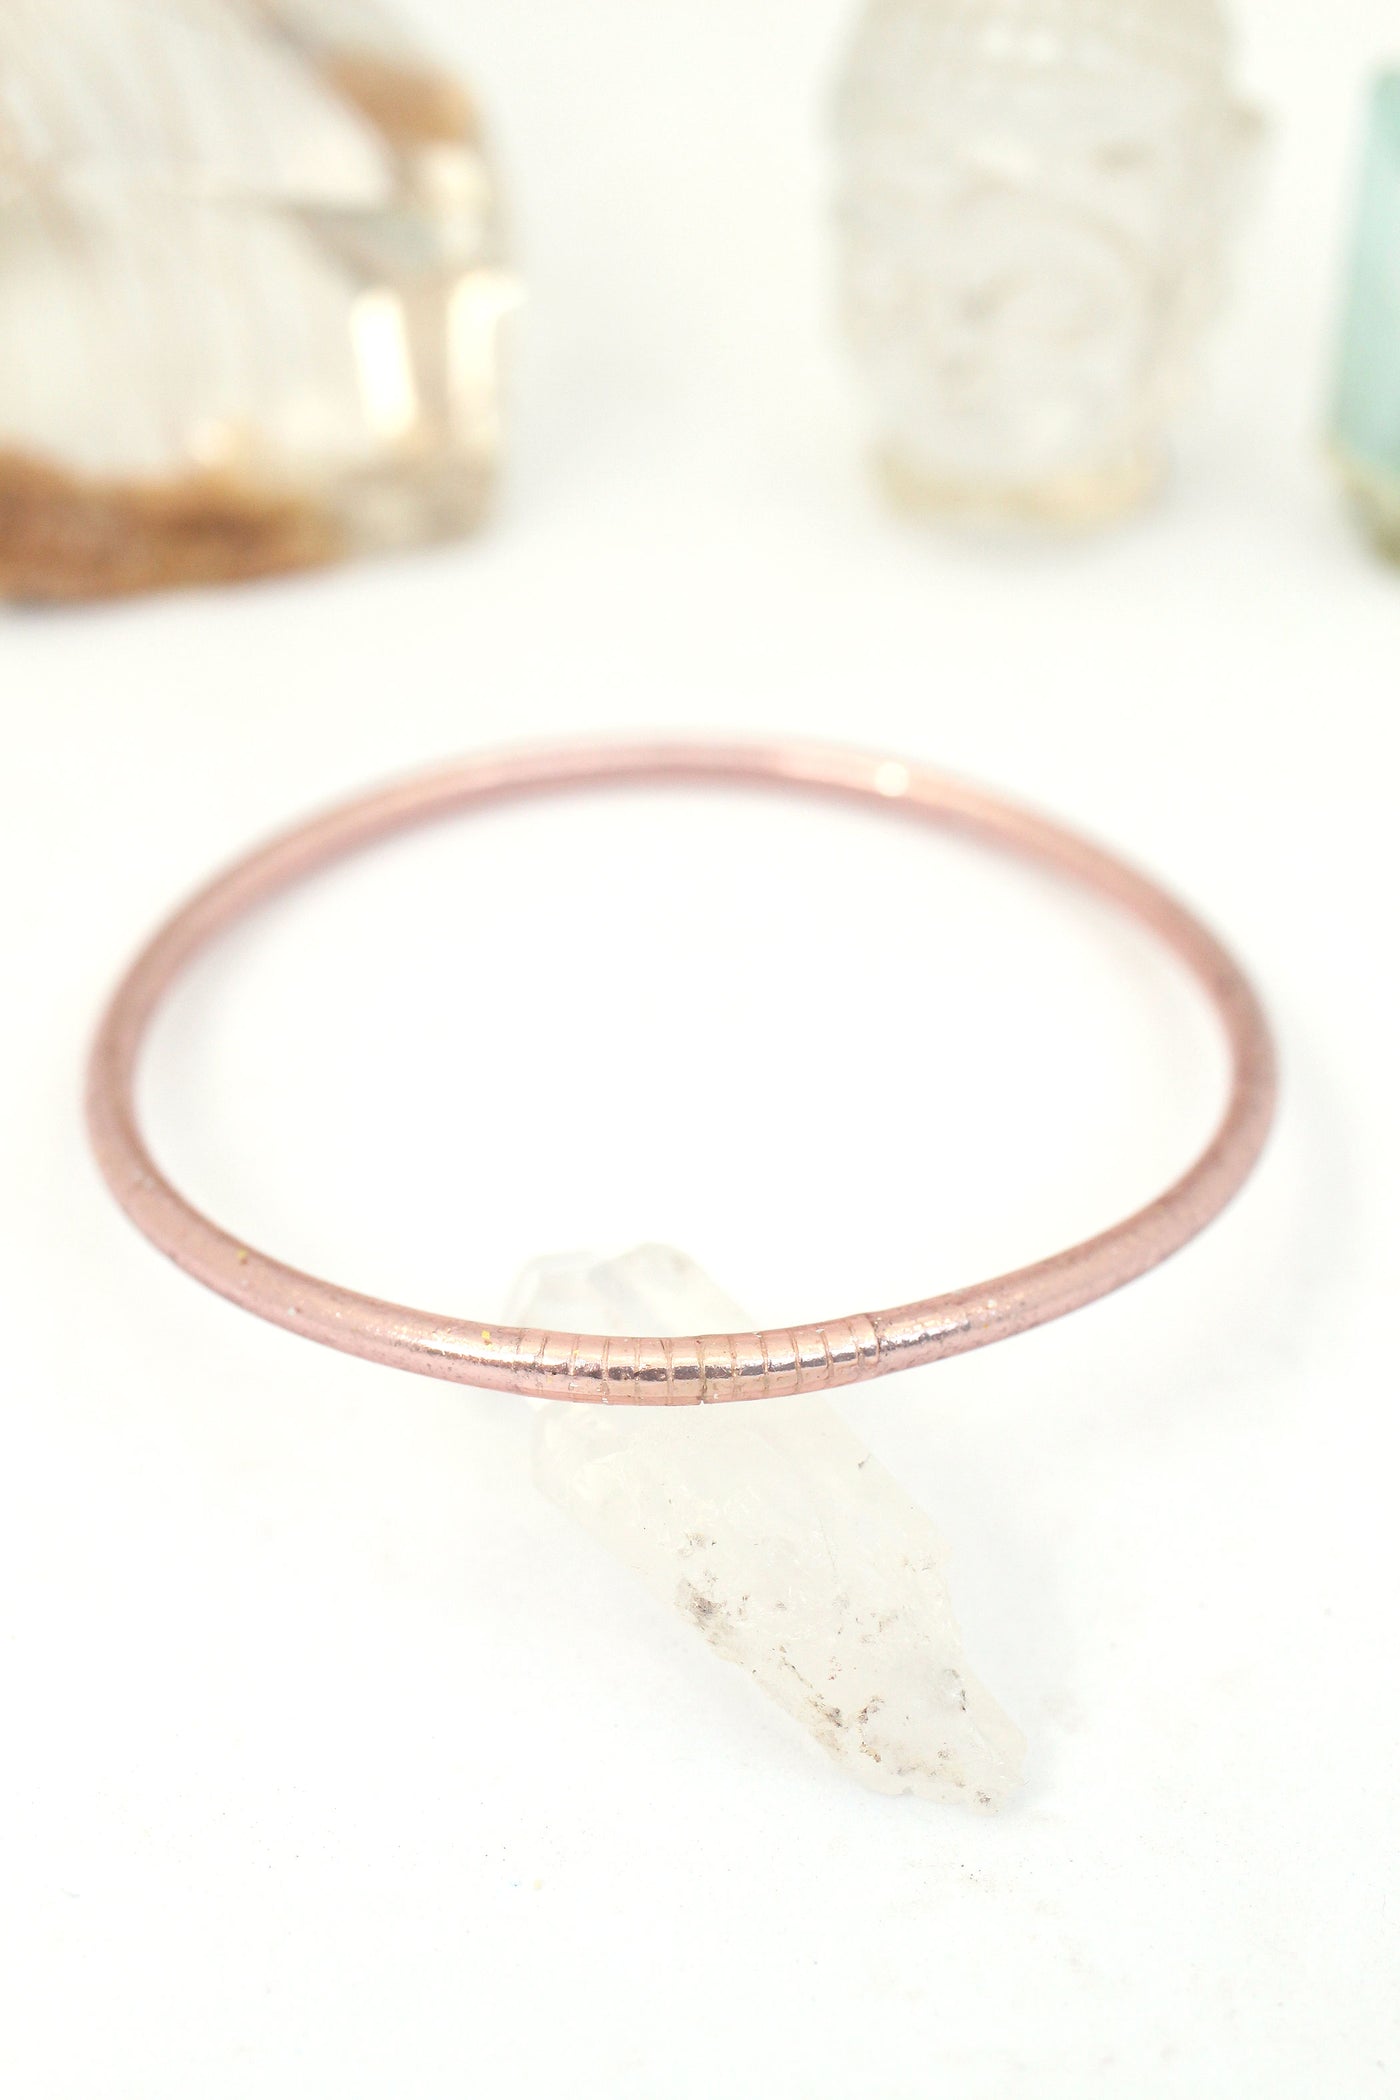 Rose Gold Temple Bracelet, Mantra Bangle from Thailand, Blessed by Monk